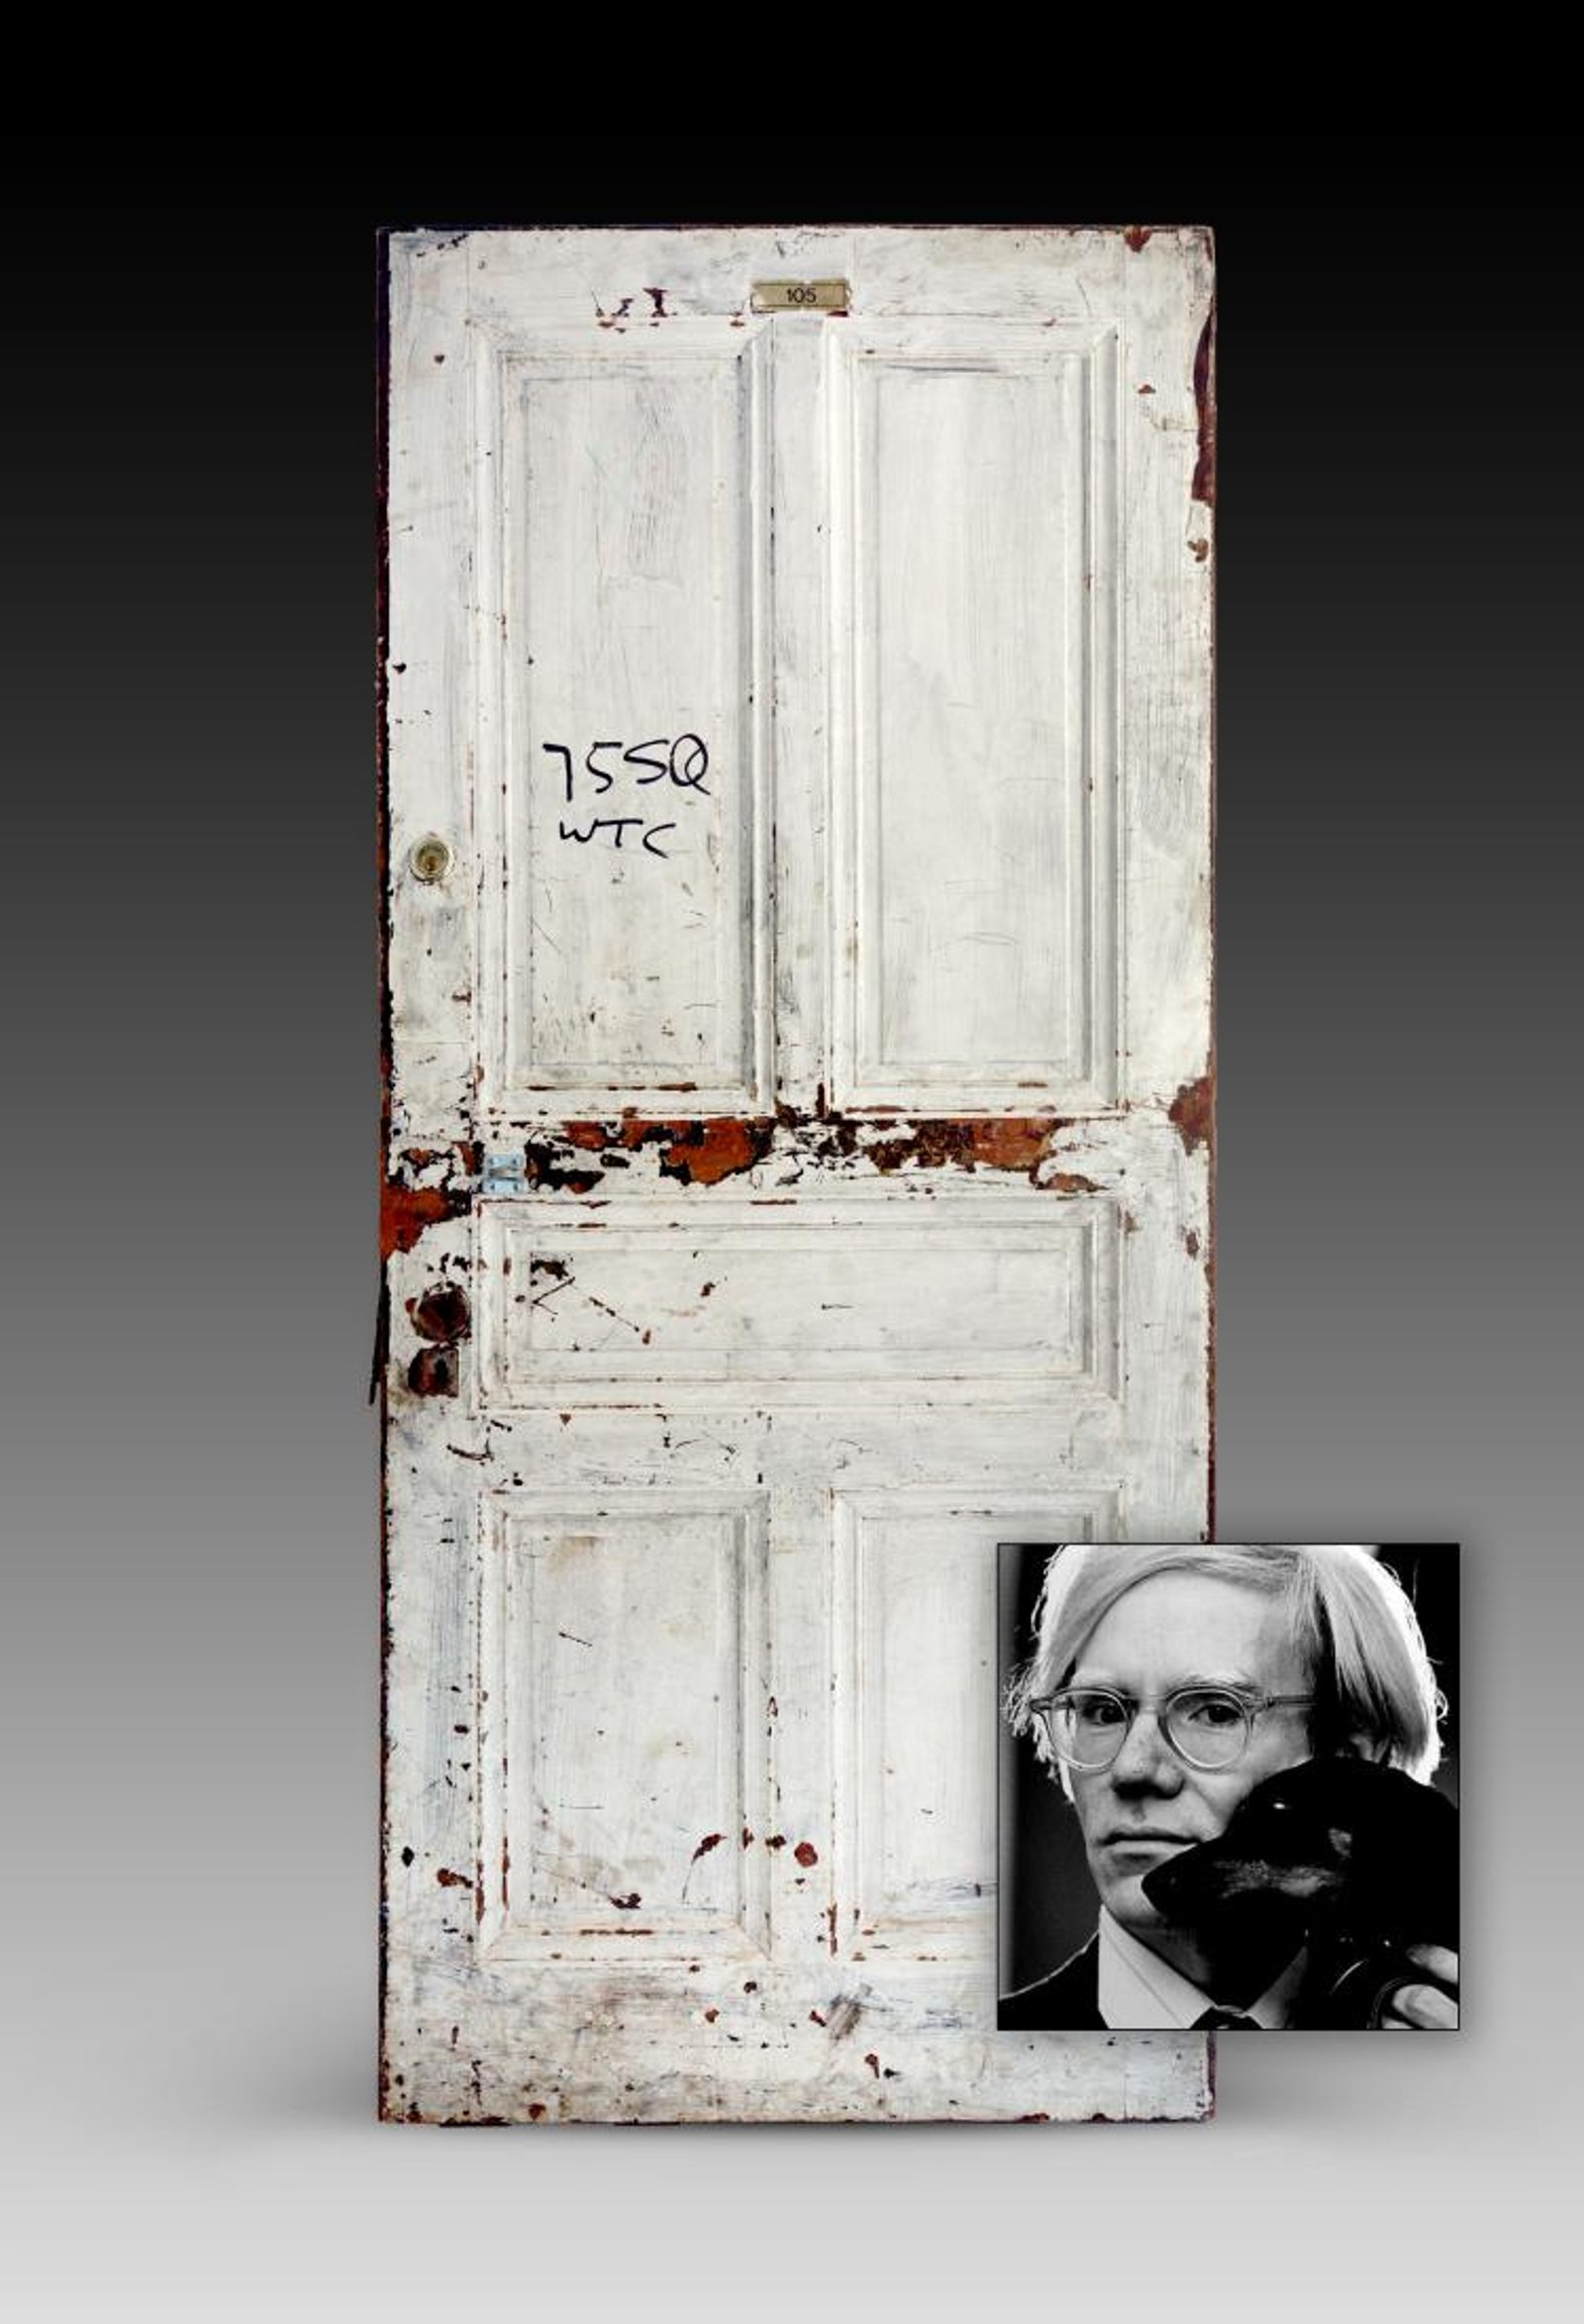 Andy Warhol's Chelsea Hotel door. Image courtesy of Guernsey's